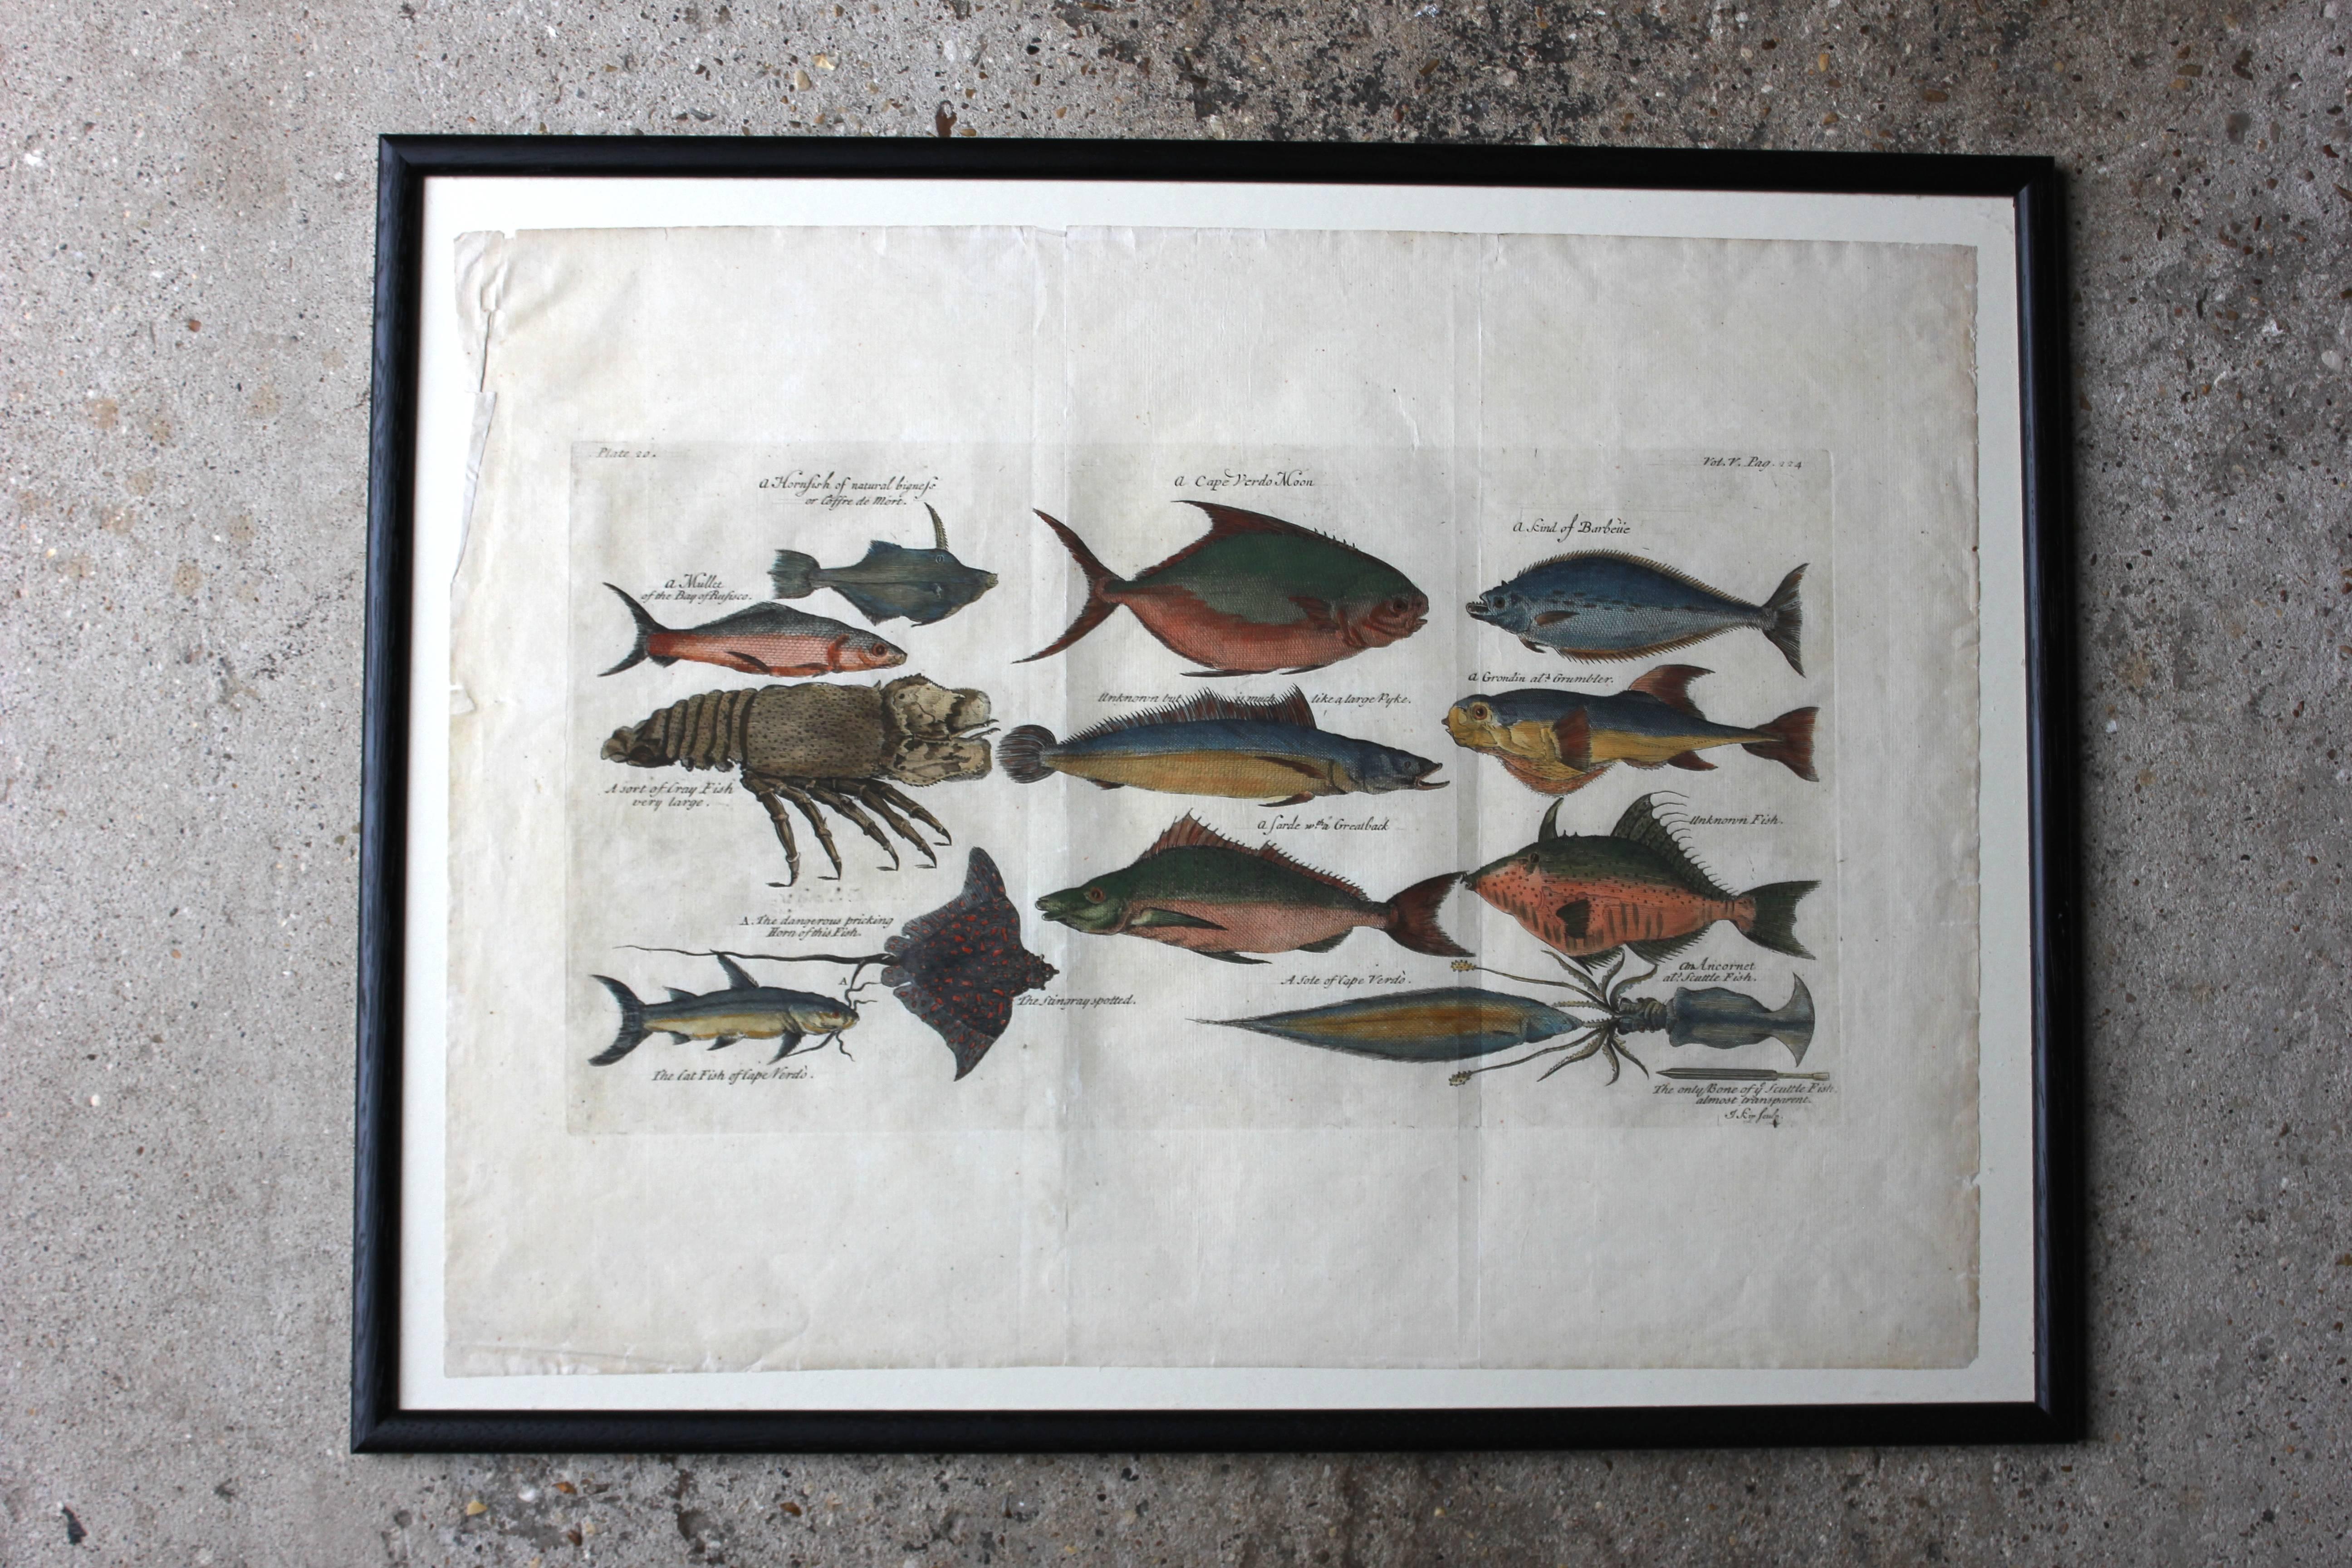 Hand-Colored Copper Plates of Fish from “a Collection of Voyages and Travels